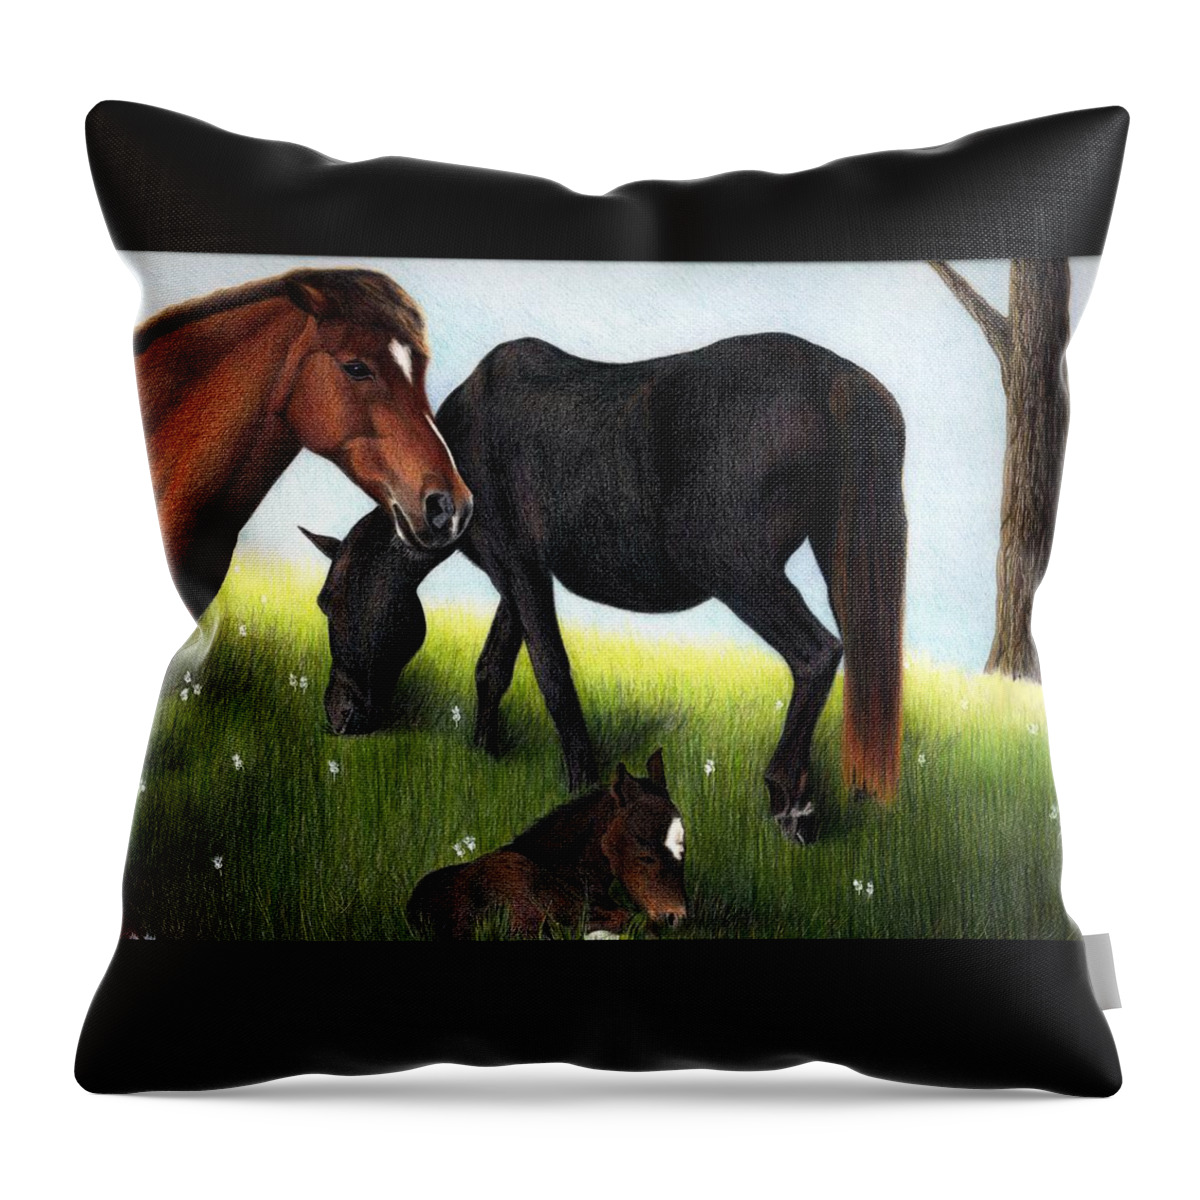 Horses Throw Pillow featuring the drawing Three Horses by Danielle R T Haney